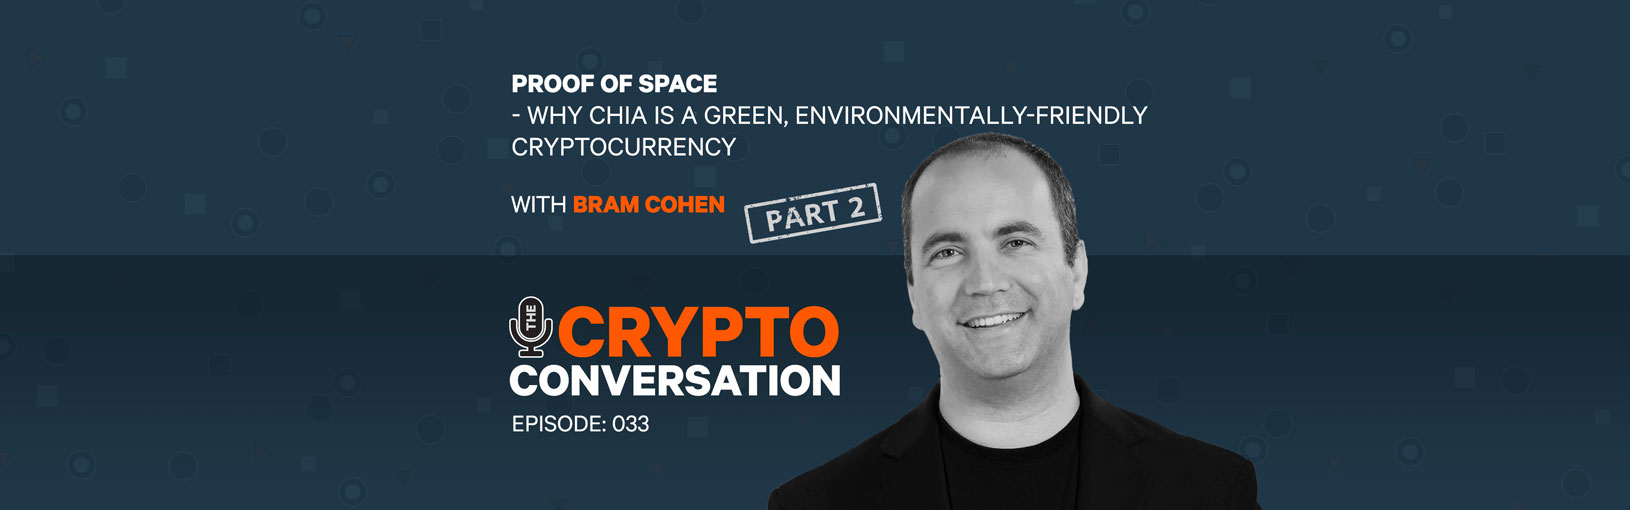 Proof of Space – Chia is a green, environmentally-friendly cryptocurrency